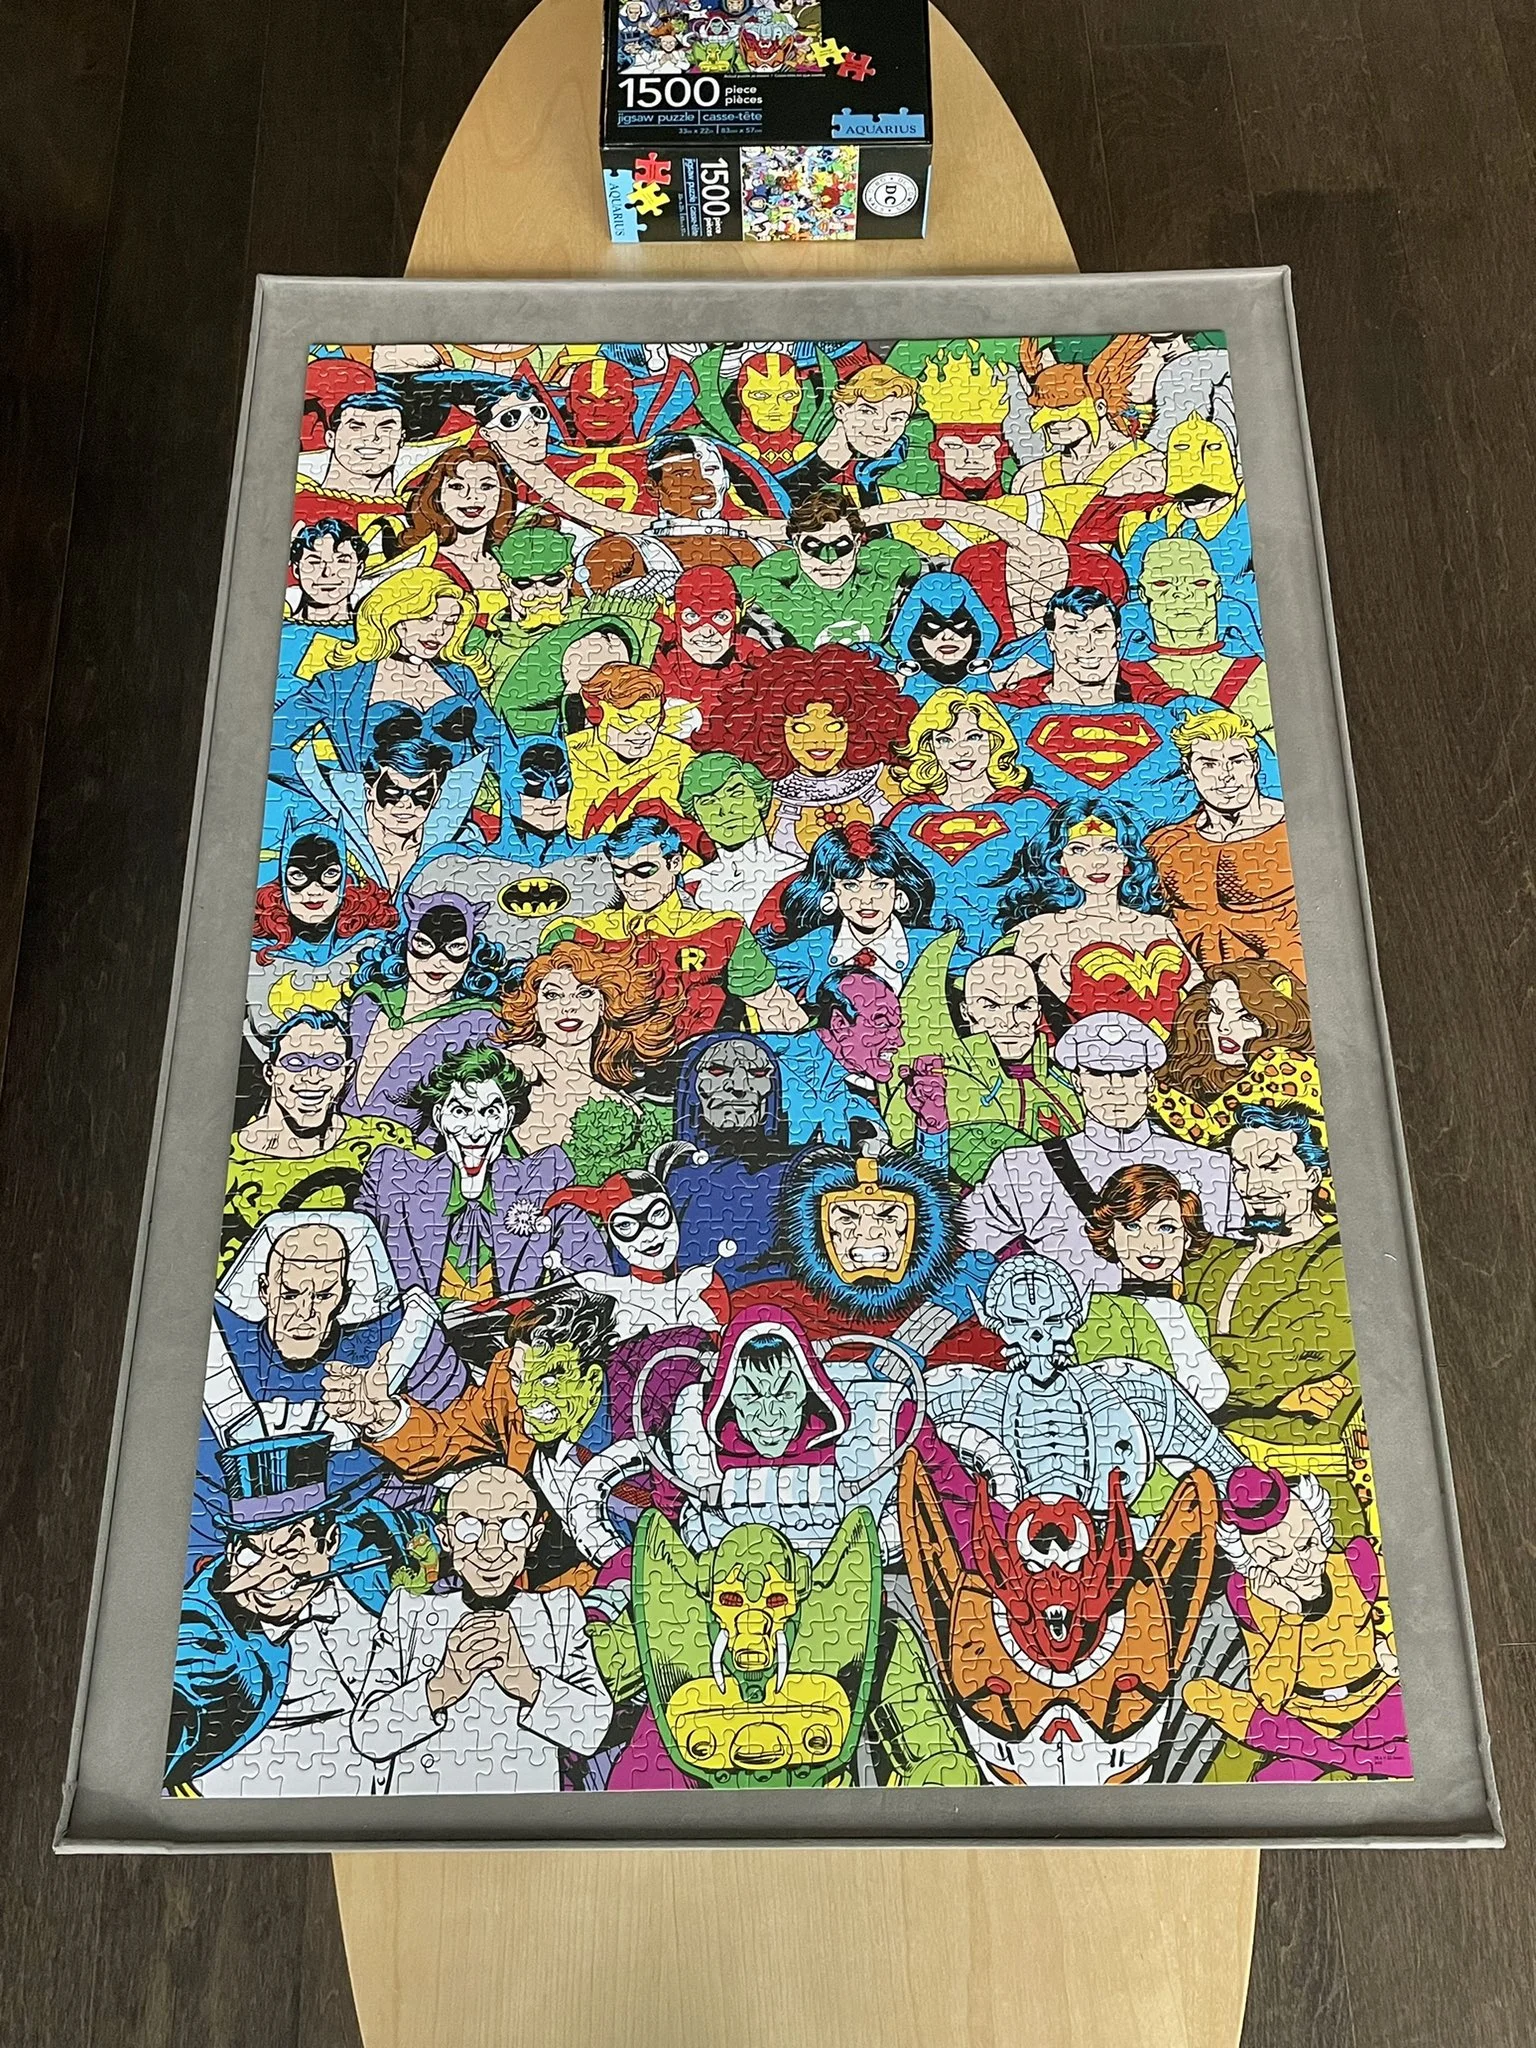 1500 piece puzzle featuring lots of comic book characters from the DC universe.